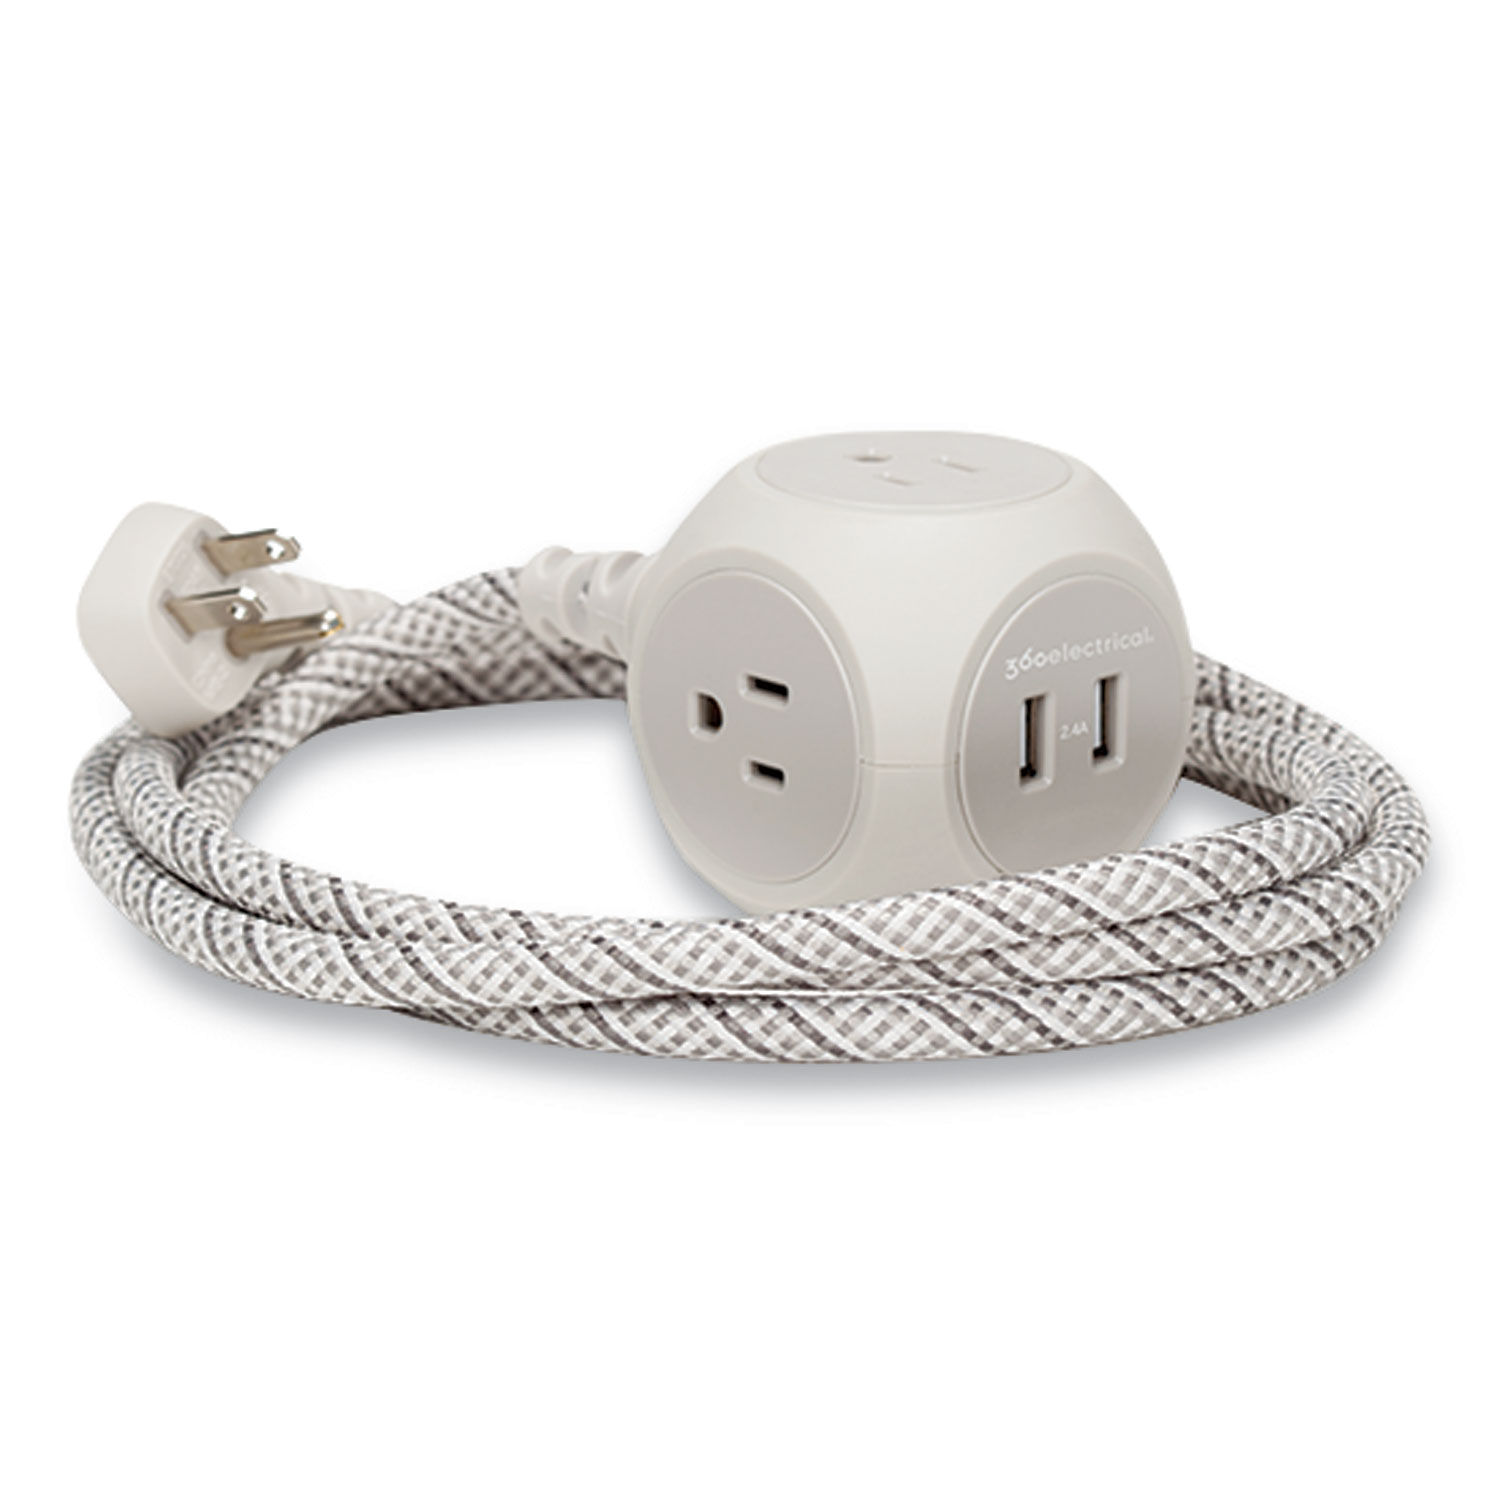 Habitat Premium Extension Cord + USB 6 ft Braided Cord, 13 A, French Gray